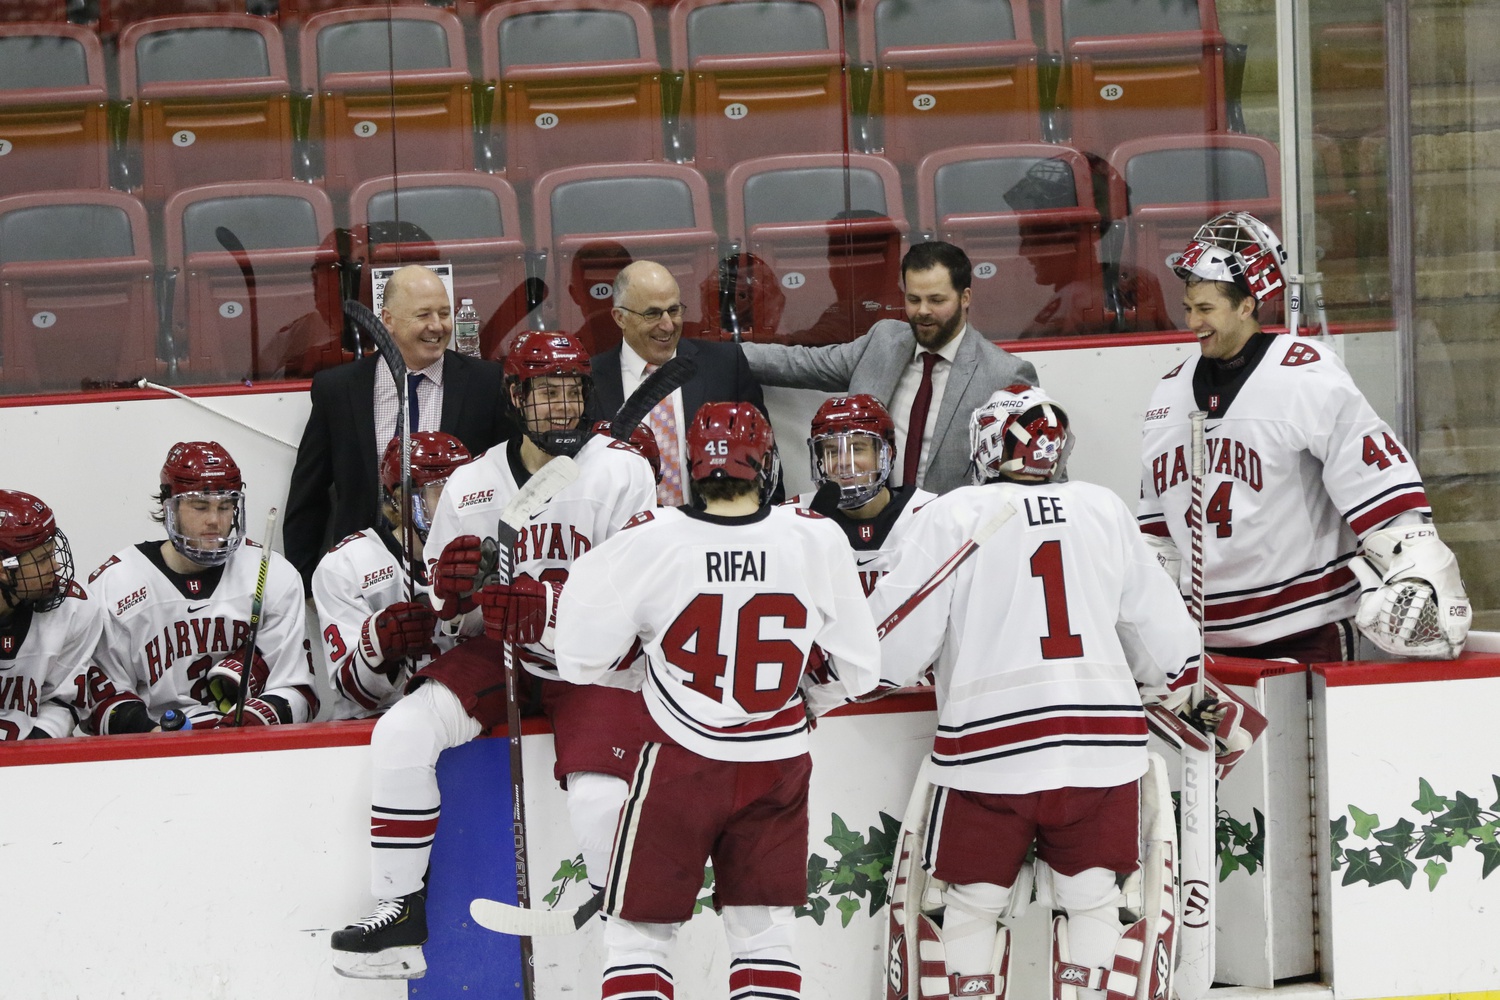 Harvard head coach Ted Donato (left) shares a light moment with his team and fellow coaches during a timeout against St. Lawrence on March 7, 2020.